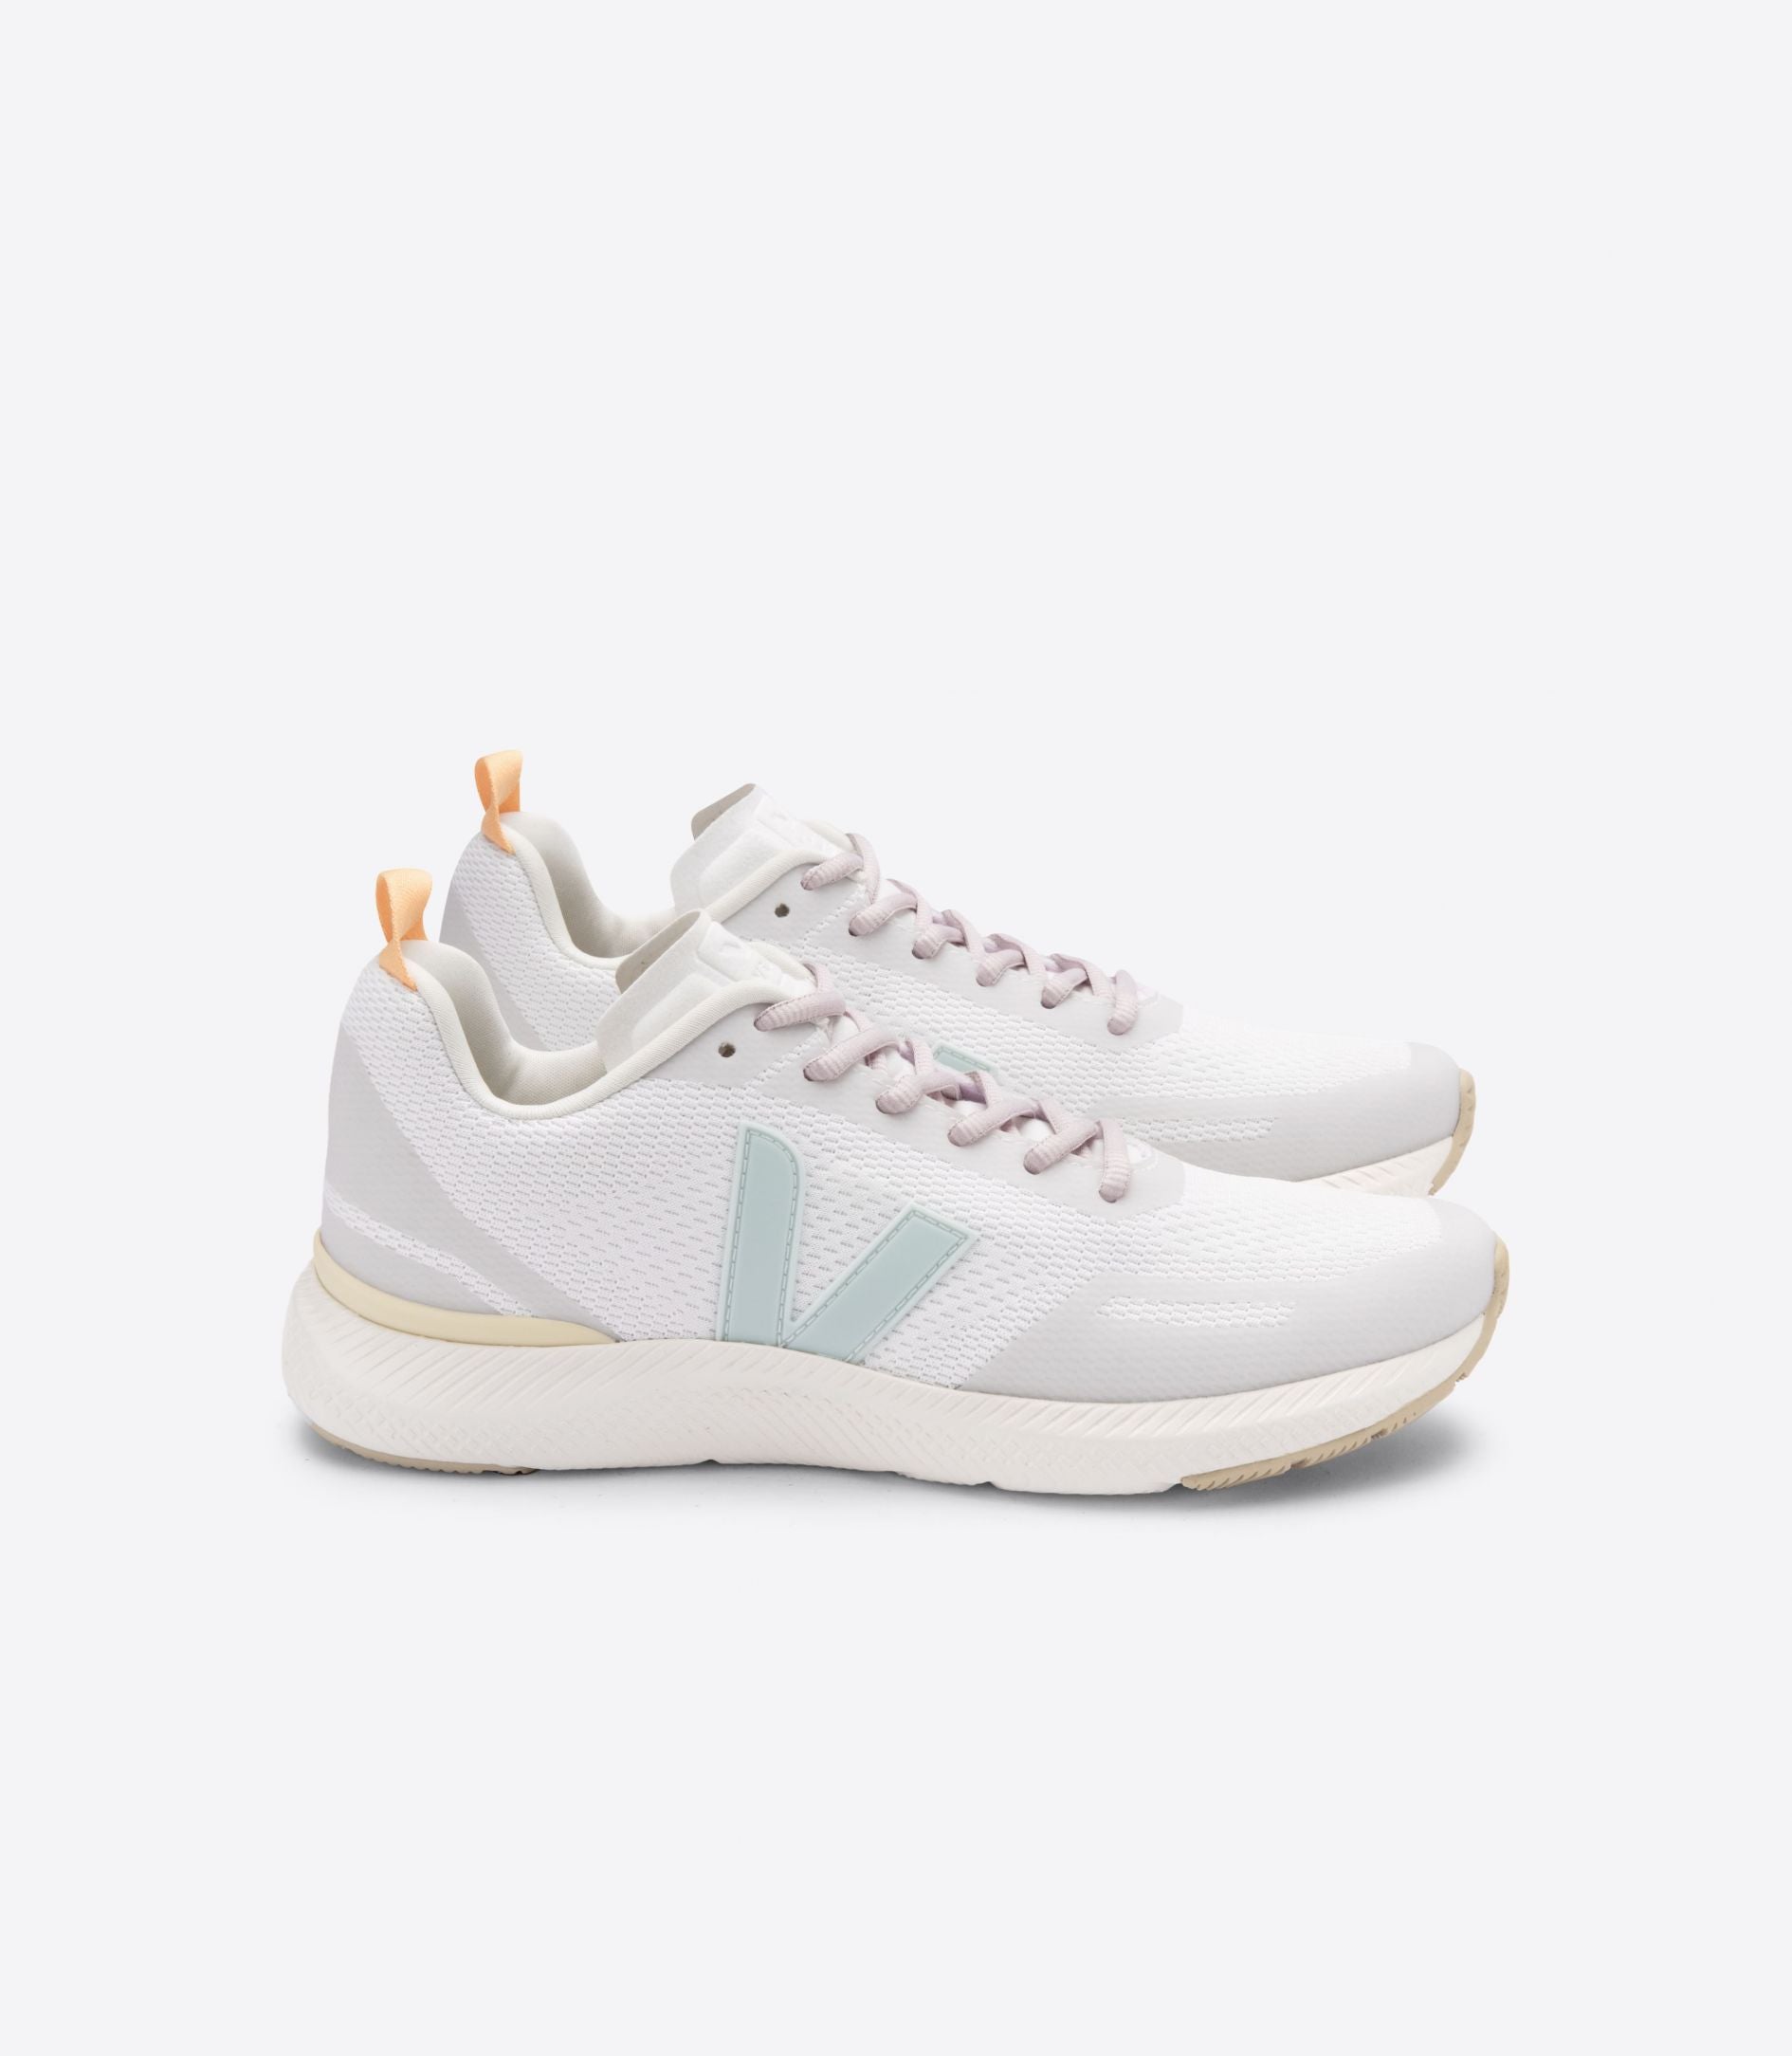 VEJA creates its first training: the Impala, the lightest pair that VEJA has developed.  The Impala provides comfort and support. It was designed for all types of sports exercises, such as gym sessions and treadmill runs.    Eng-Mesh technology allows for custom placement of breathable and supportive zones. This mesh alternates between tight and loose stitches.